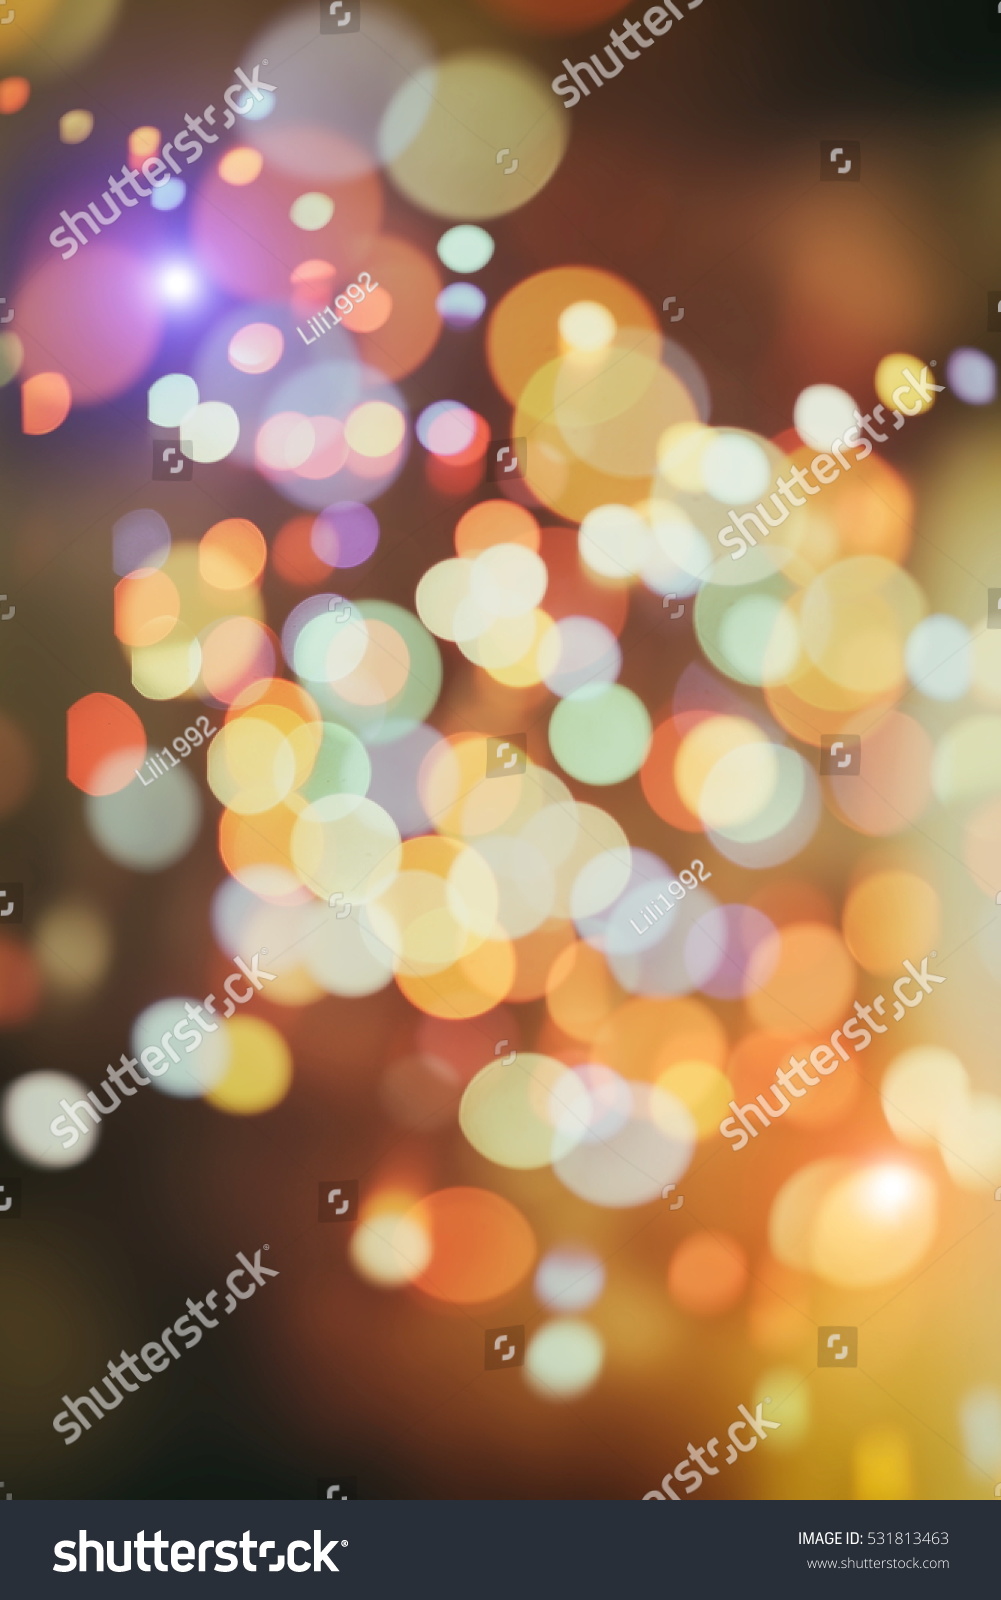 Twinkly Lights and Stars Christmas Background #531813463